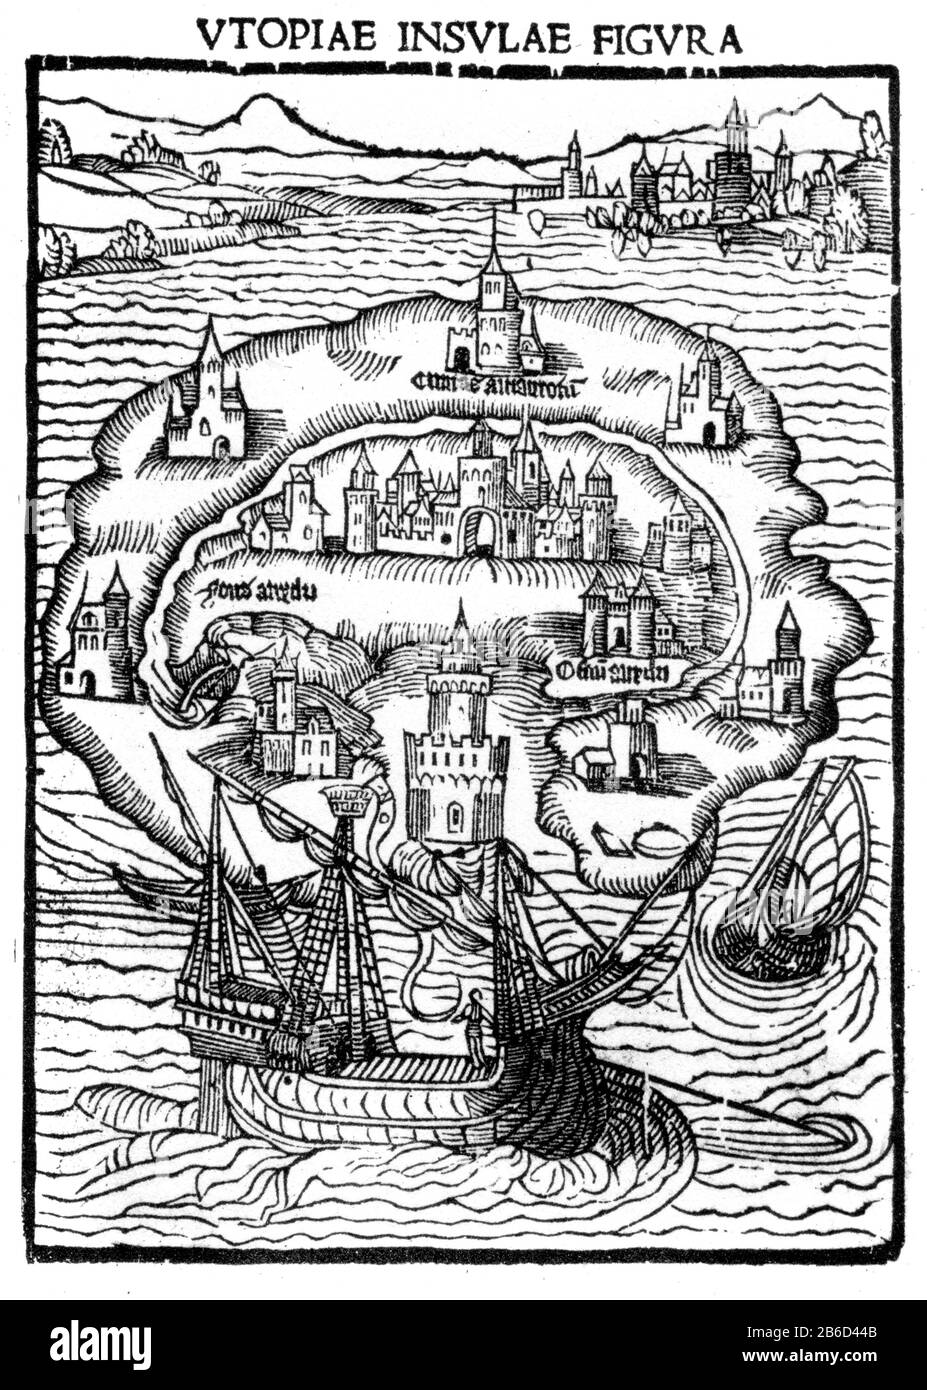 The Island of Utopia, 1516. Woodcut from the 1st edition of 'Utopia', 1516. Utopia (Libellus vere aureus, nec minus salutaris quam festivus, de optimo rei publicae statu deque nova insula Utopia or A little, true book, not less beneficial than enjoyable, about how things should be in the new island Utopia) is a work of fiction and socio-political satire by Thomas More (1478-1535). Stock Photo